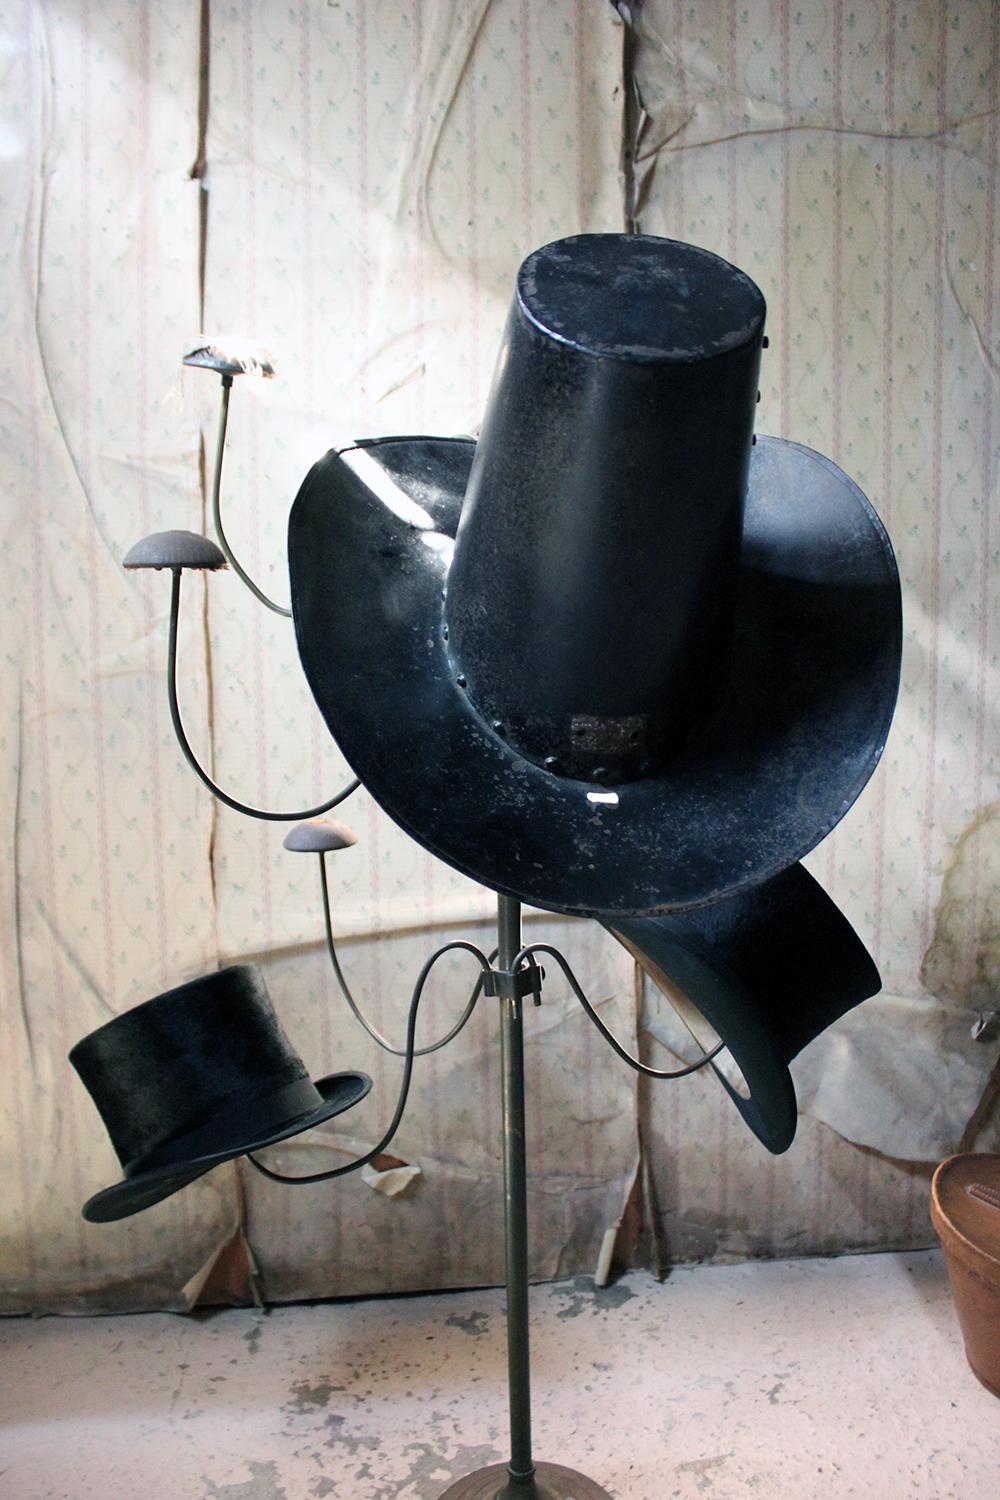 Folk Art Painted Metal Milliners Top Hat Trade Sign Annie Gold circa 1890 London For Sale 9